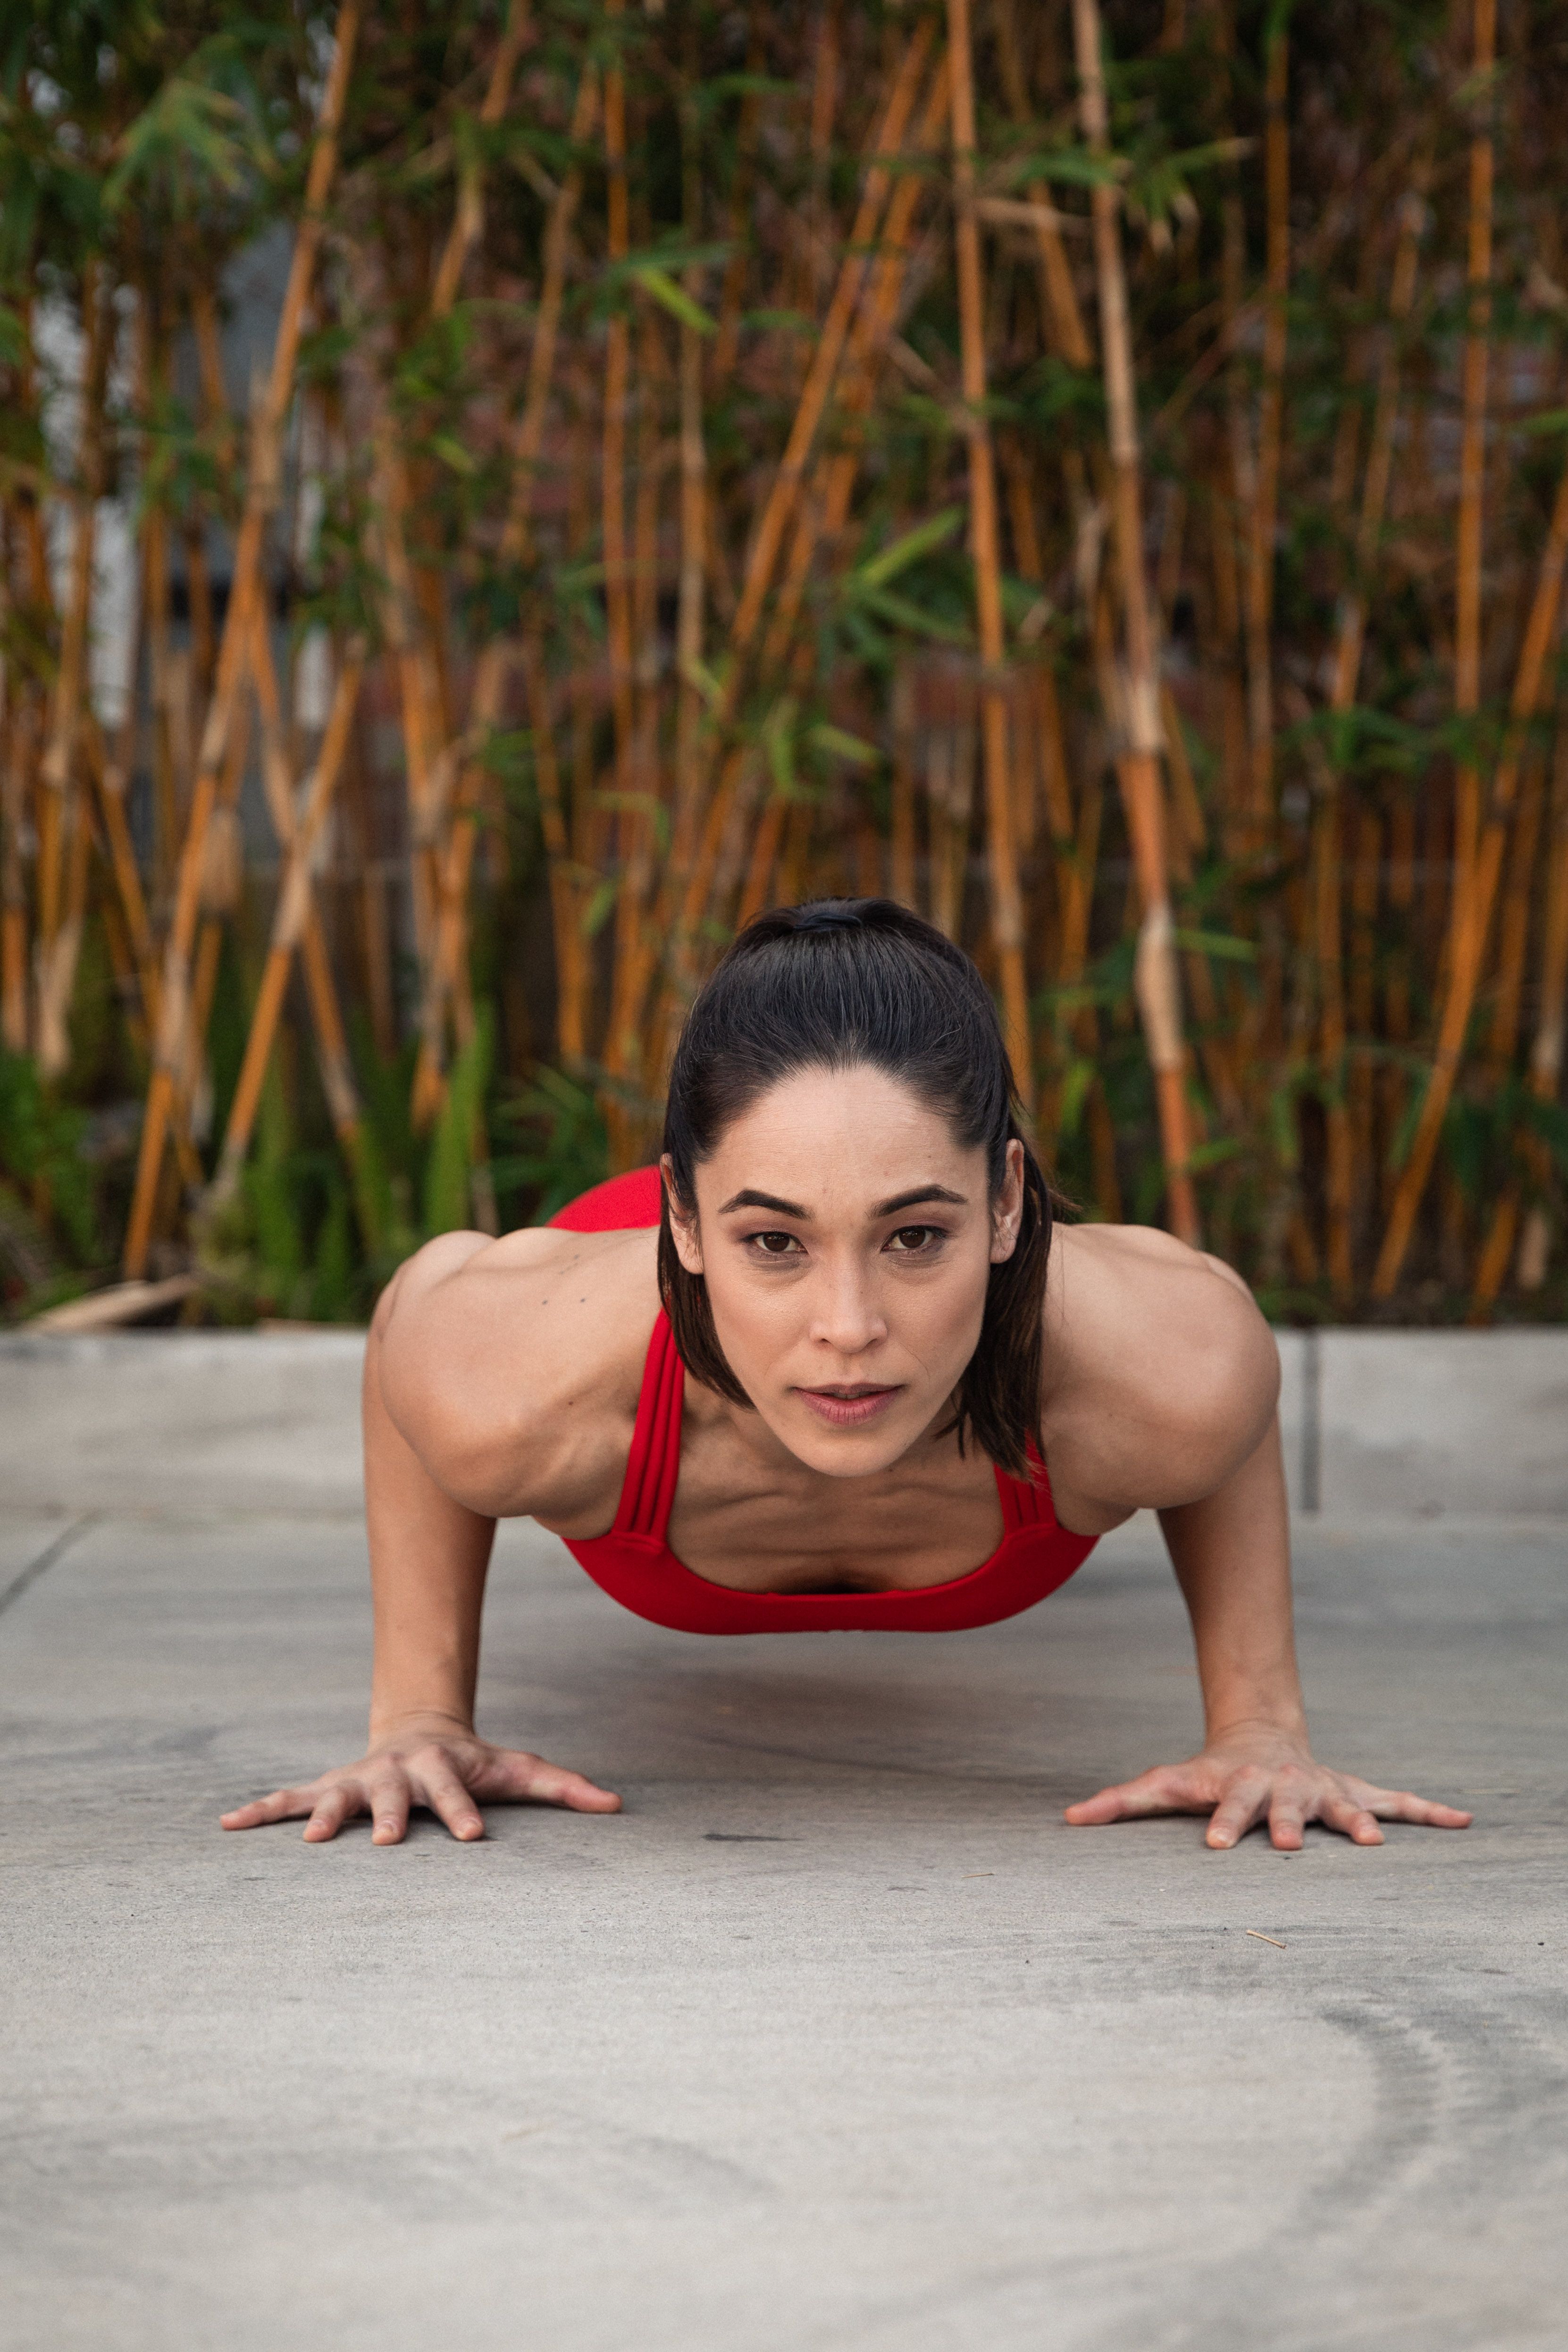 4 Functional Push-Up Variations - Oxygen Mag